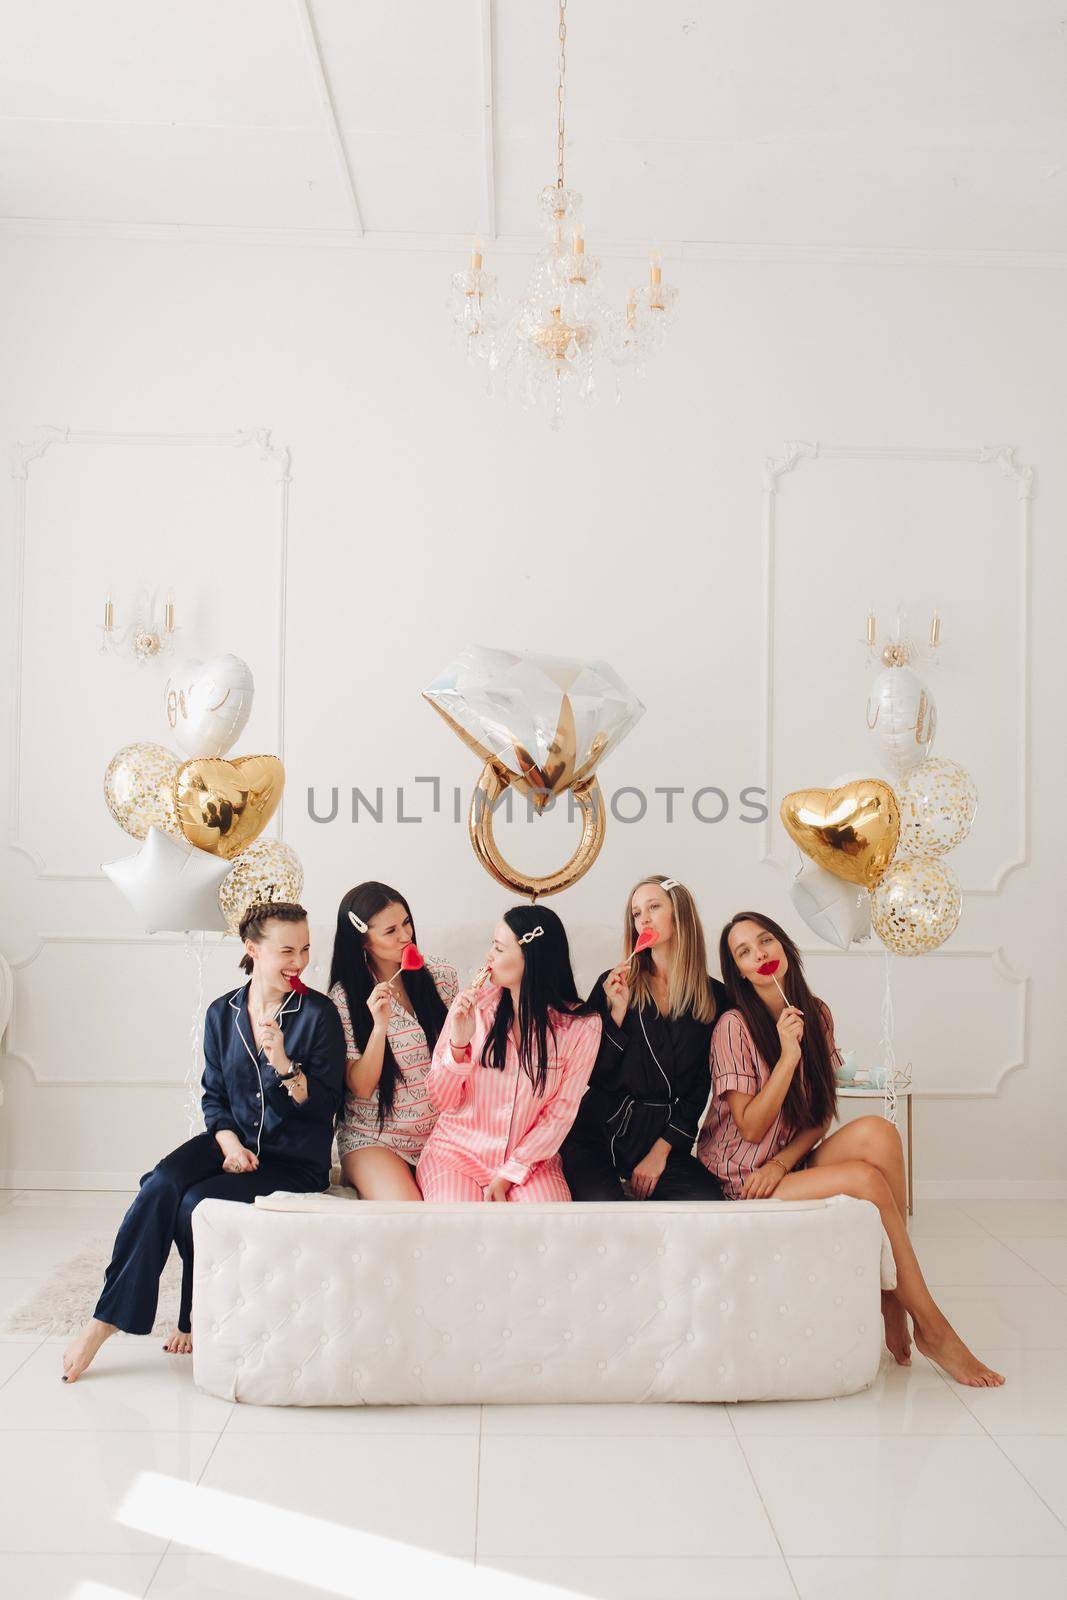 Girlfriends celebrating bachelorette party. Stock photo of five girls in pajamas by StudioLucky